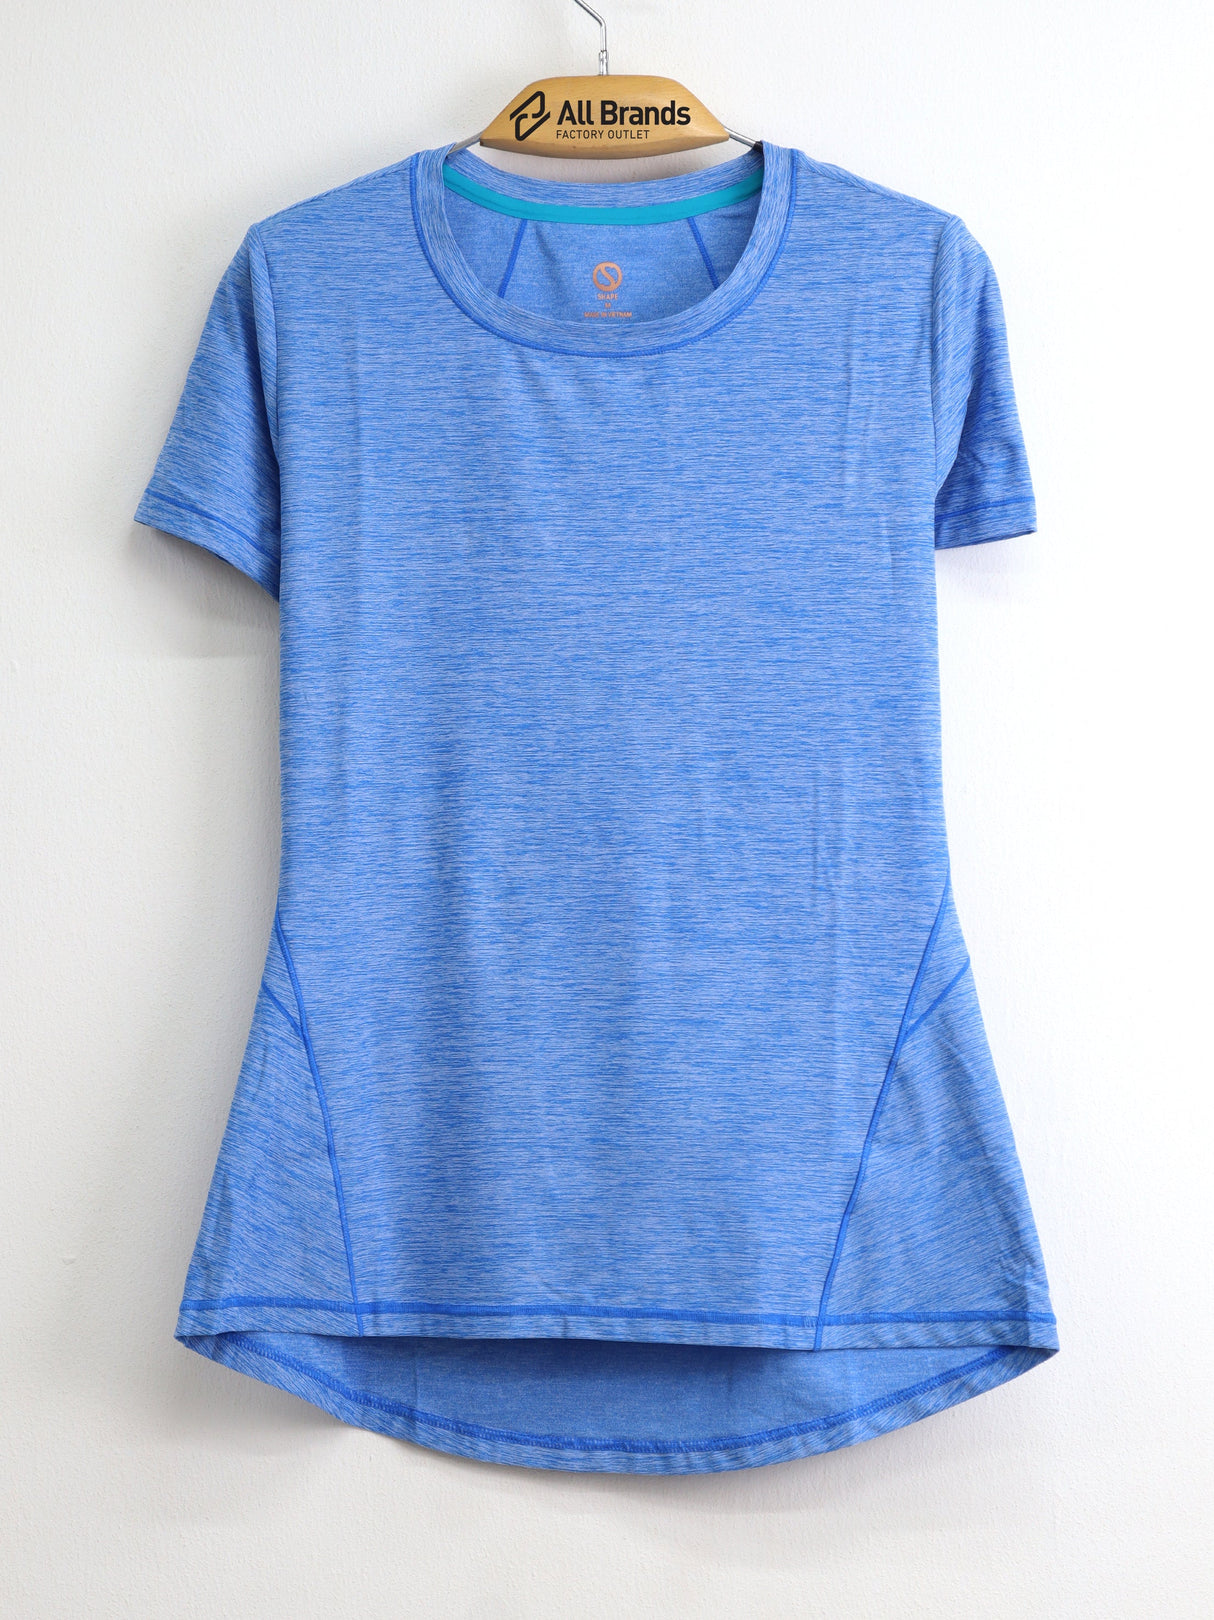 Image for Women's Textured Sport Top,Blue